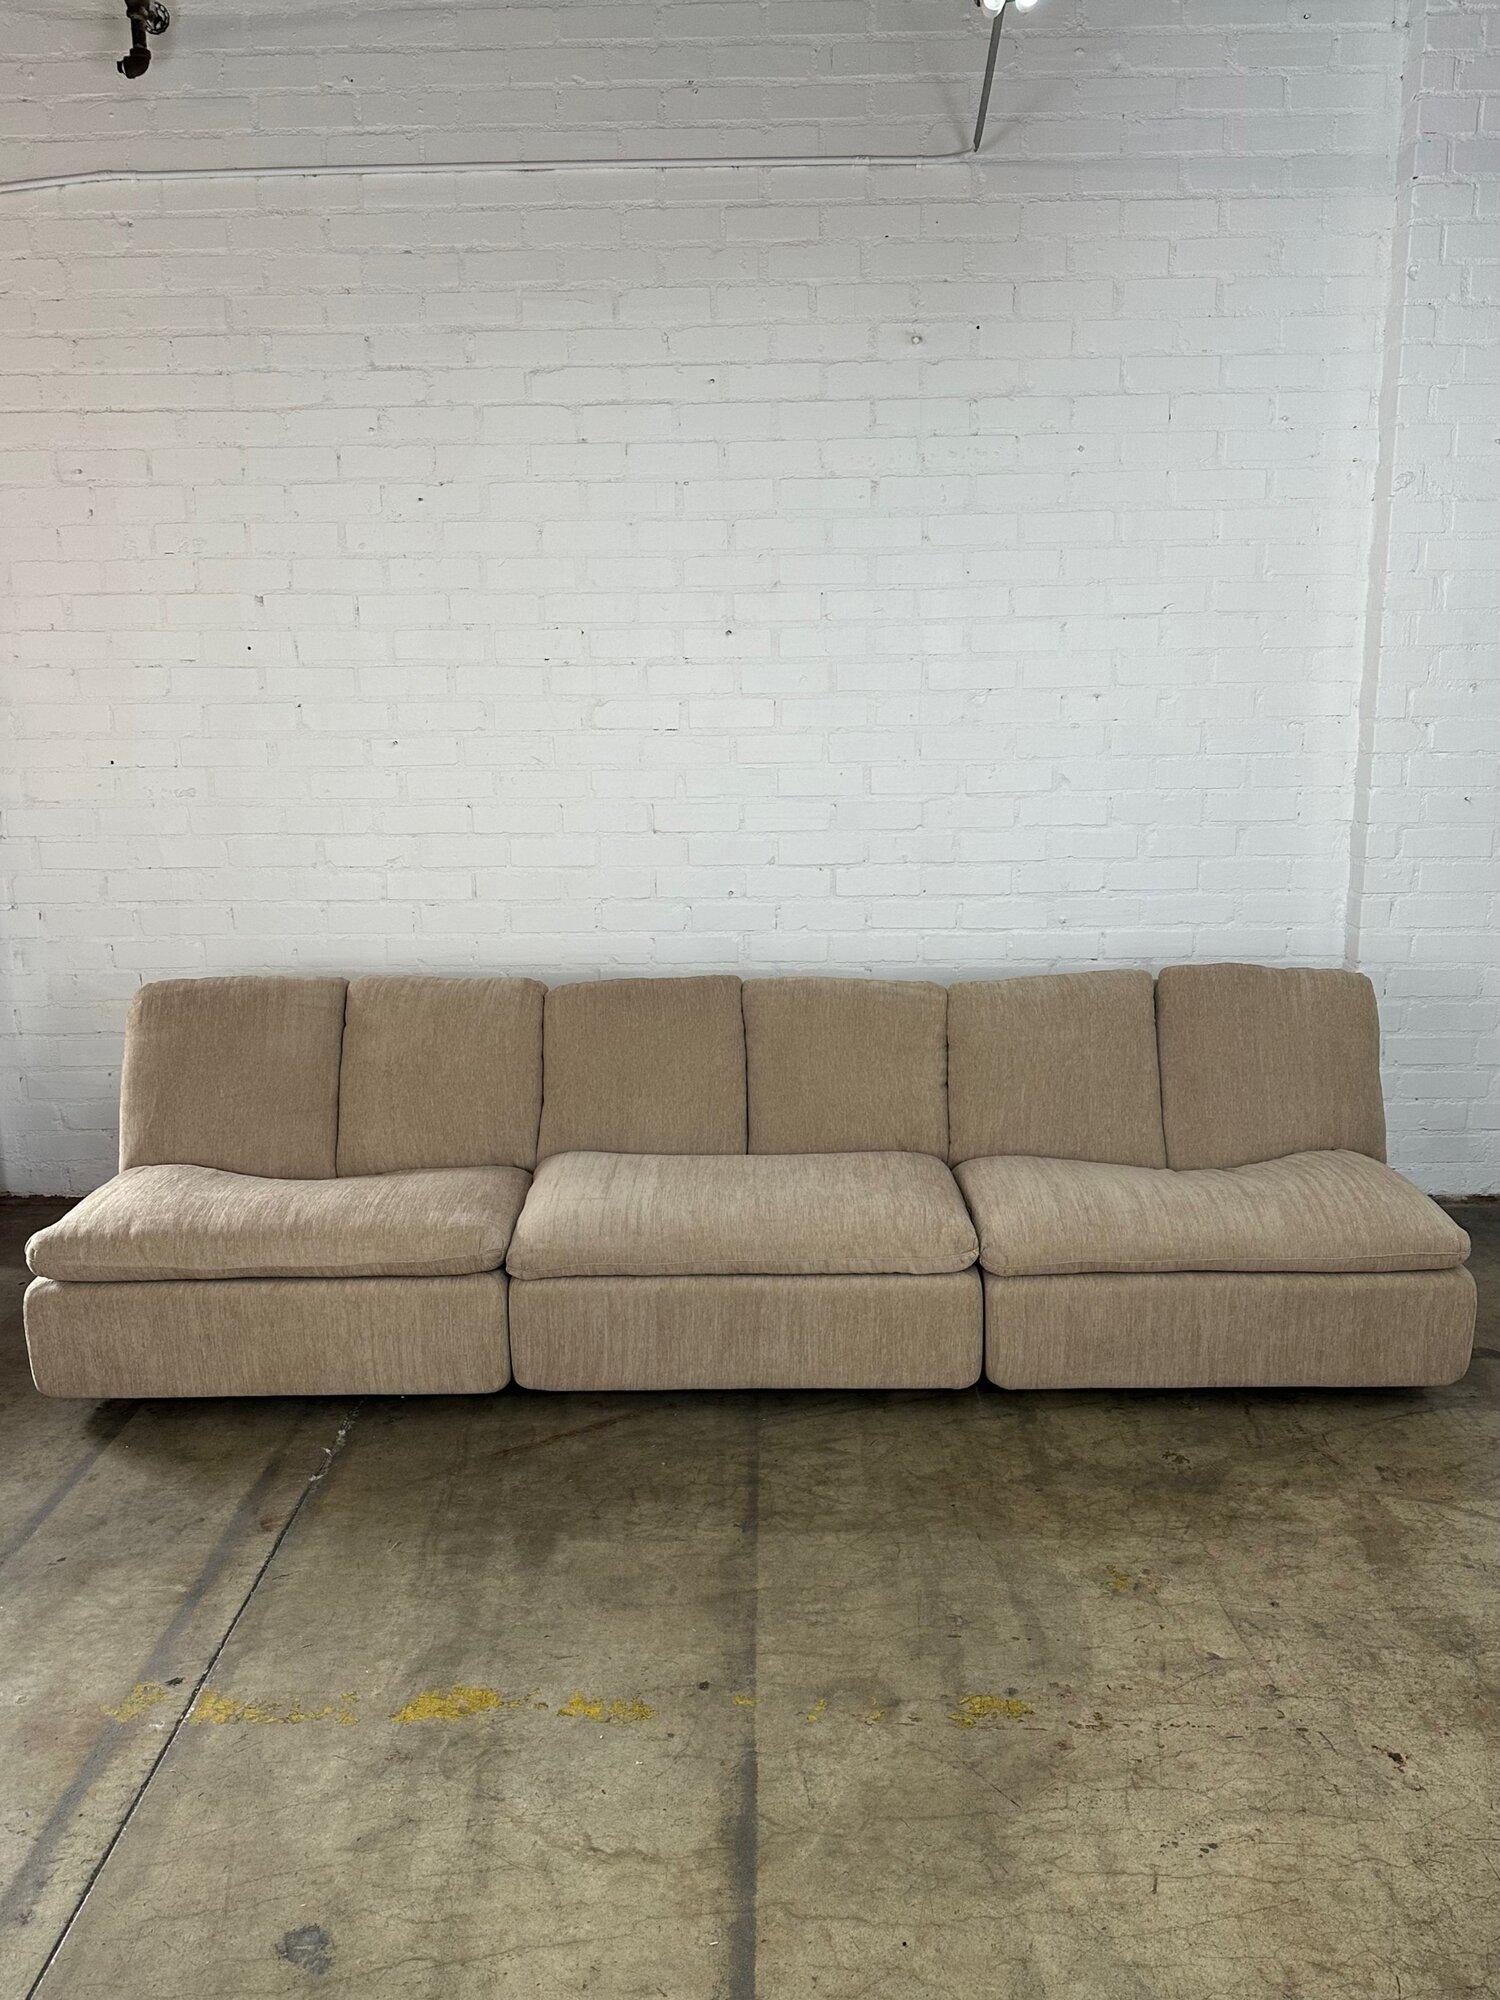 W200 D36 H30.5

Single W40.5 D34 H30.5 SW39 SD22 SH15 AH21

Vintage modular low profile sofa sections. Sofa has a strong and sturdy frame with fresh fabric. Each section sits on solid wooden pine legs that are pretty hidden. Each section has